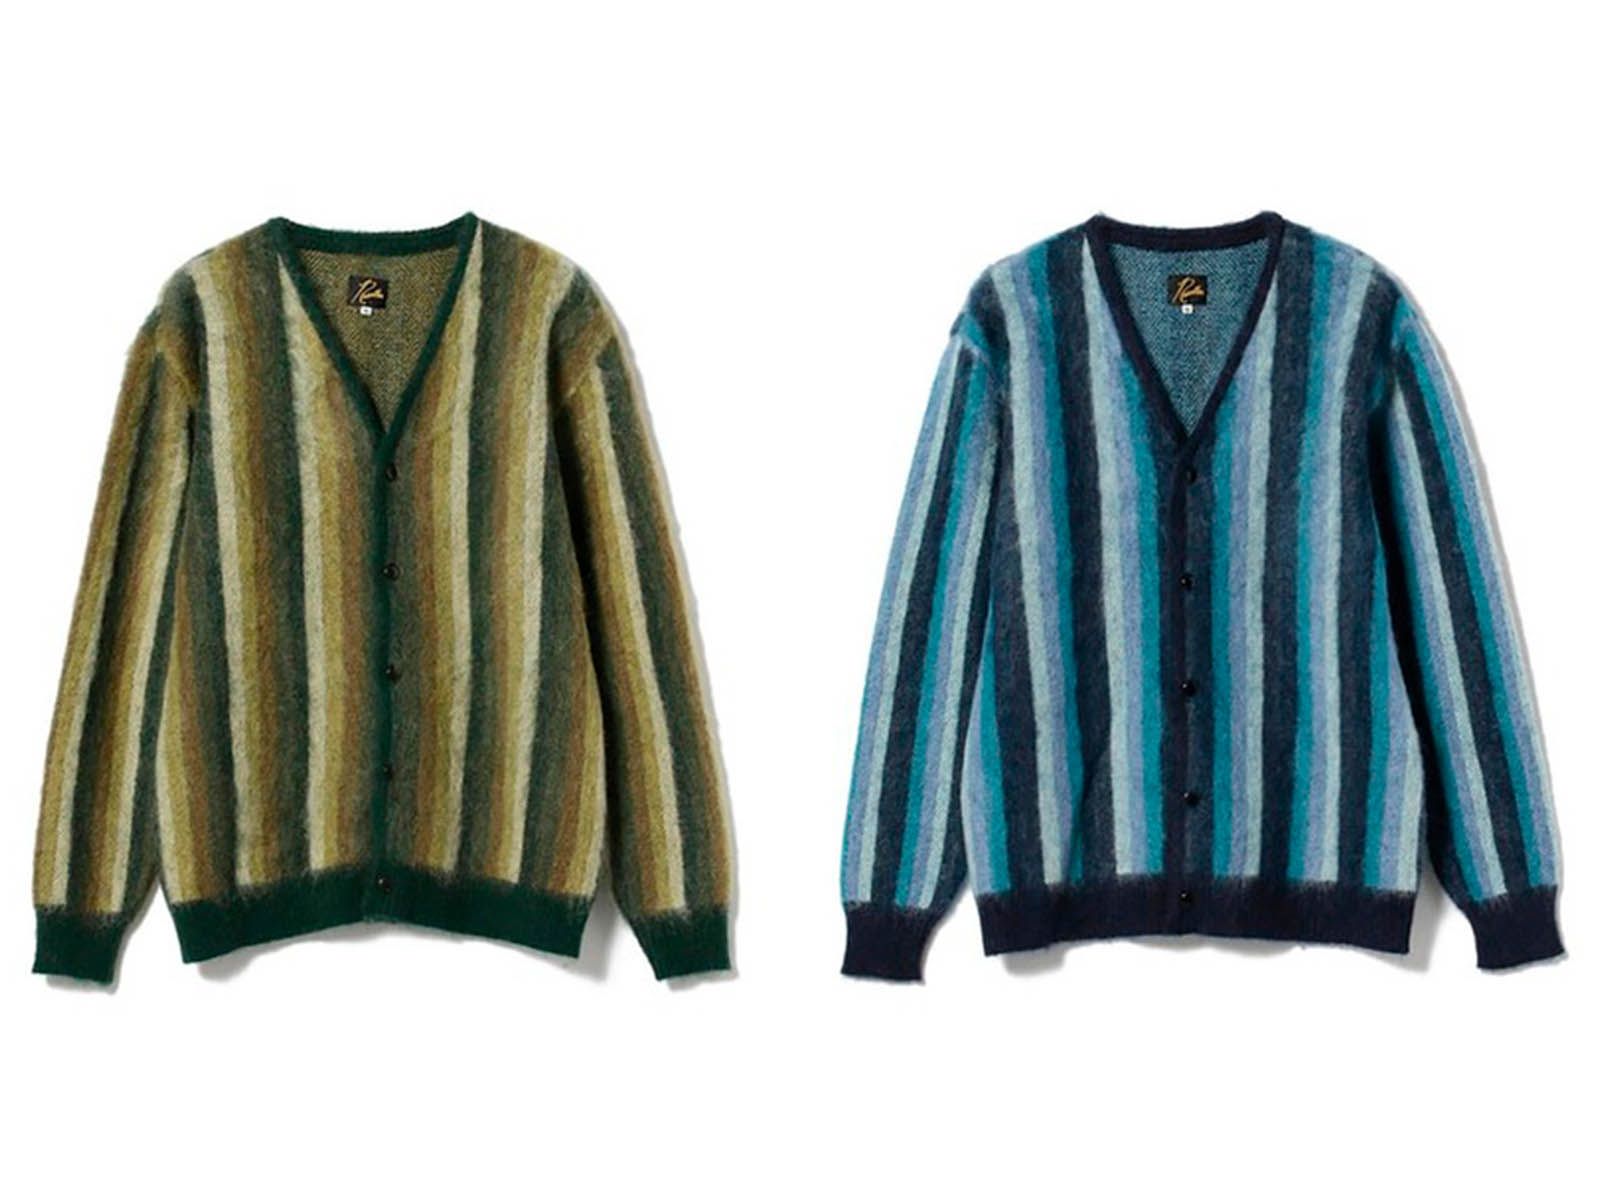 This is the new mohair cardigan from Beams x Needles